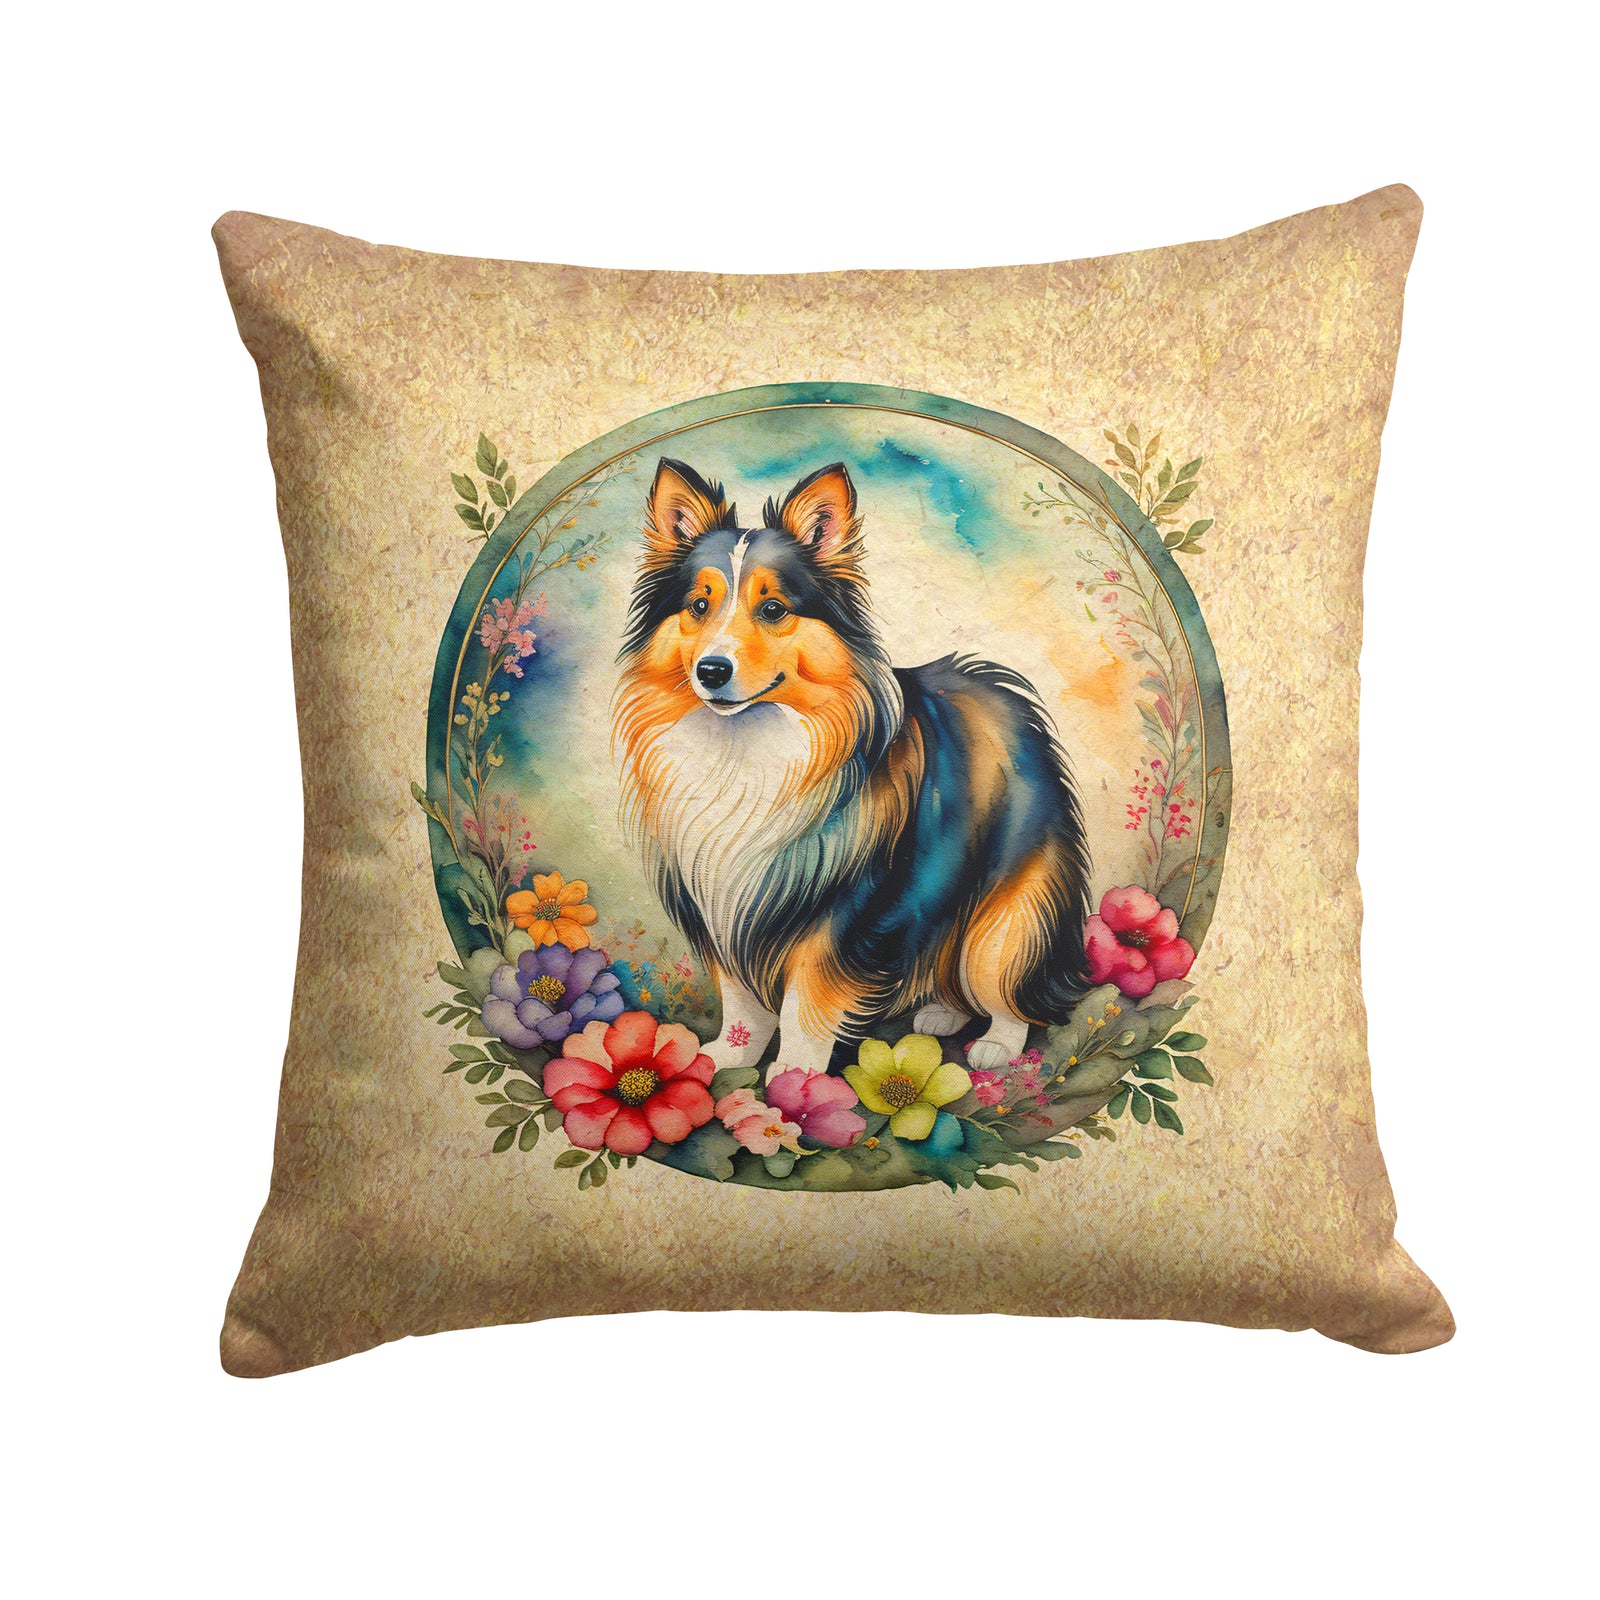 Buy this Sheltie and Flowers Fabric Decorative Pillow